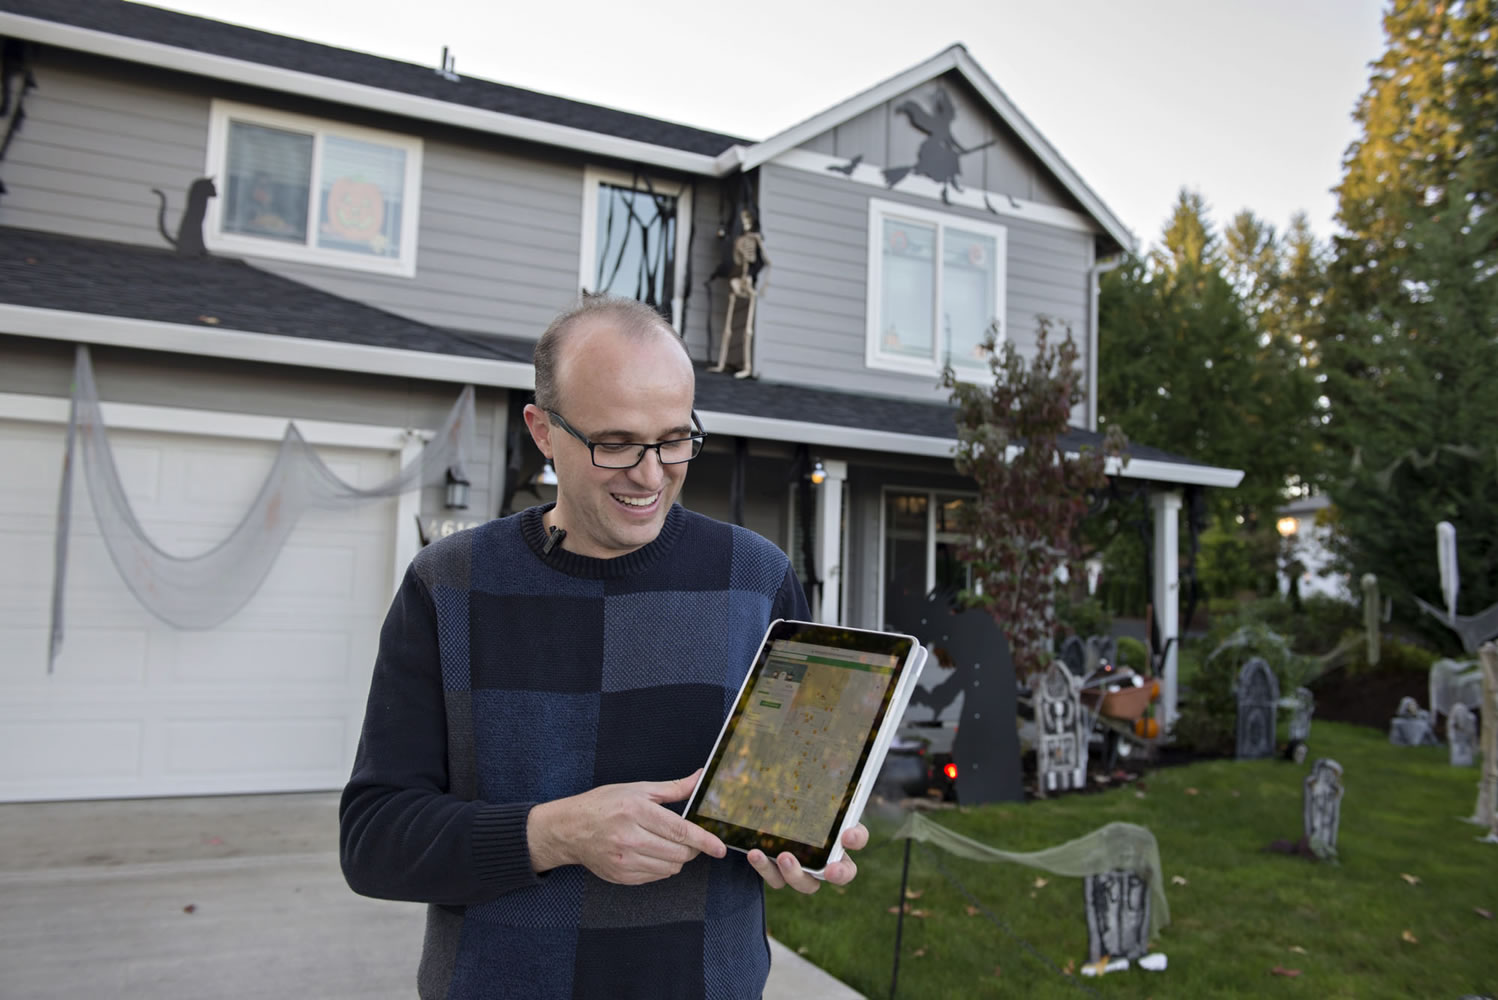 Jim Mains of Vancouver looks over the Nextdoor Treat Map on his iPad outside his home in Northwest neighborhood. People across the county are using the map to mark their homes as trick-or-treat friendly.